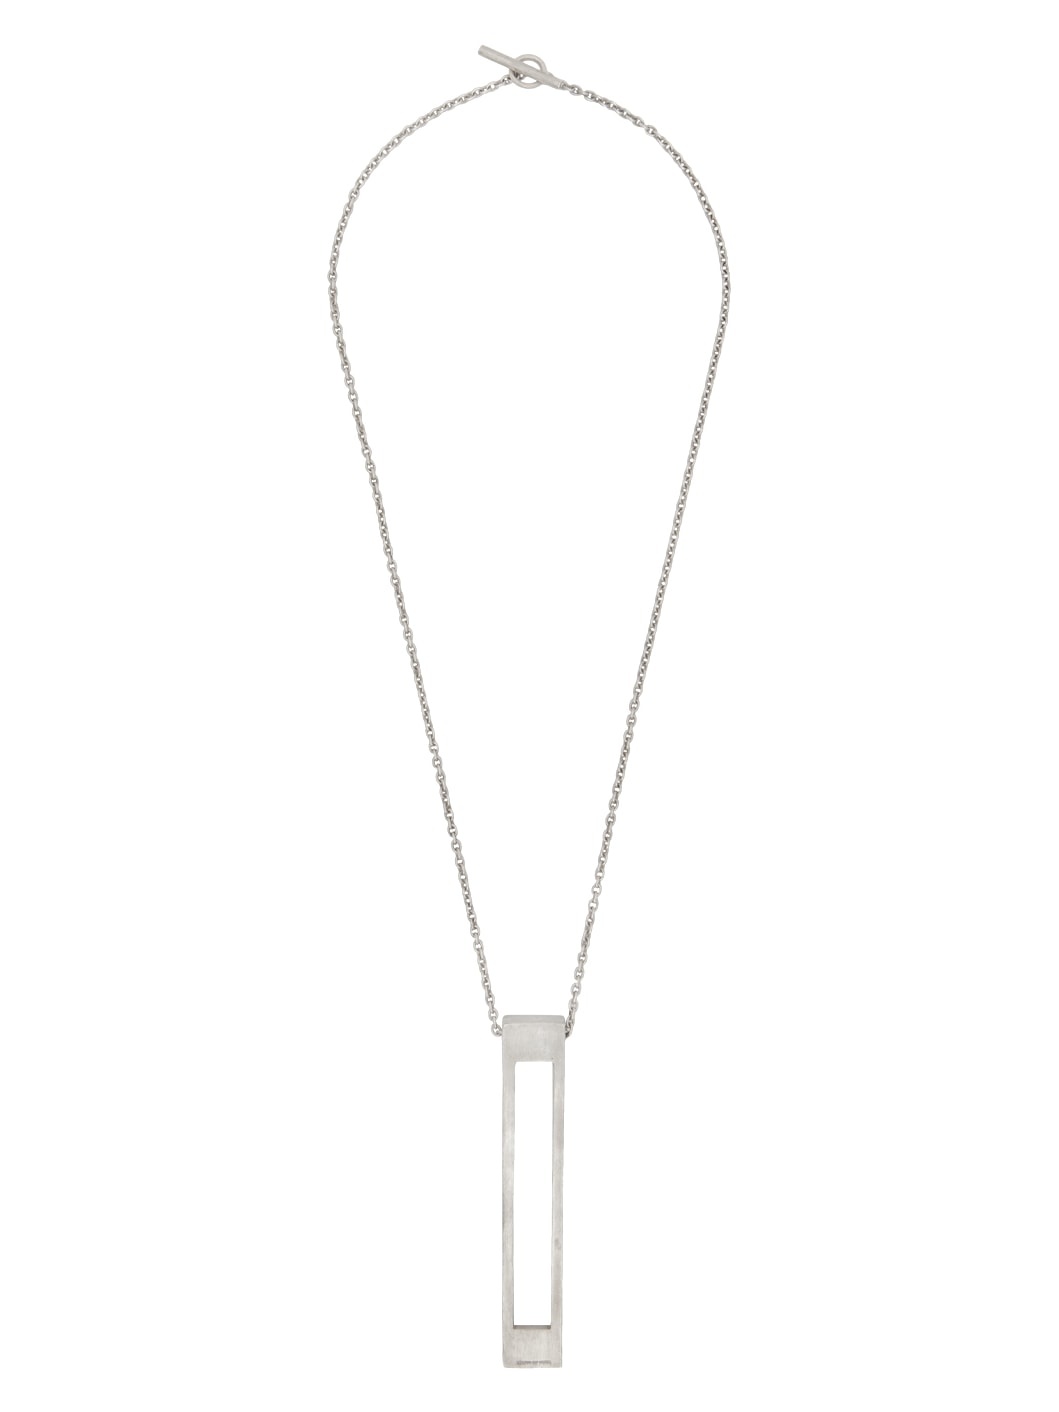 Silver Wedge Gateway Necklace - 1